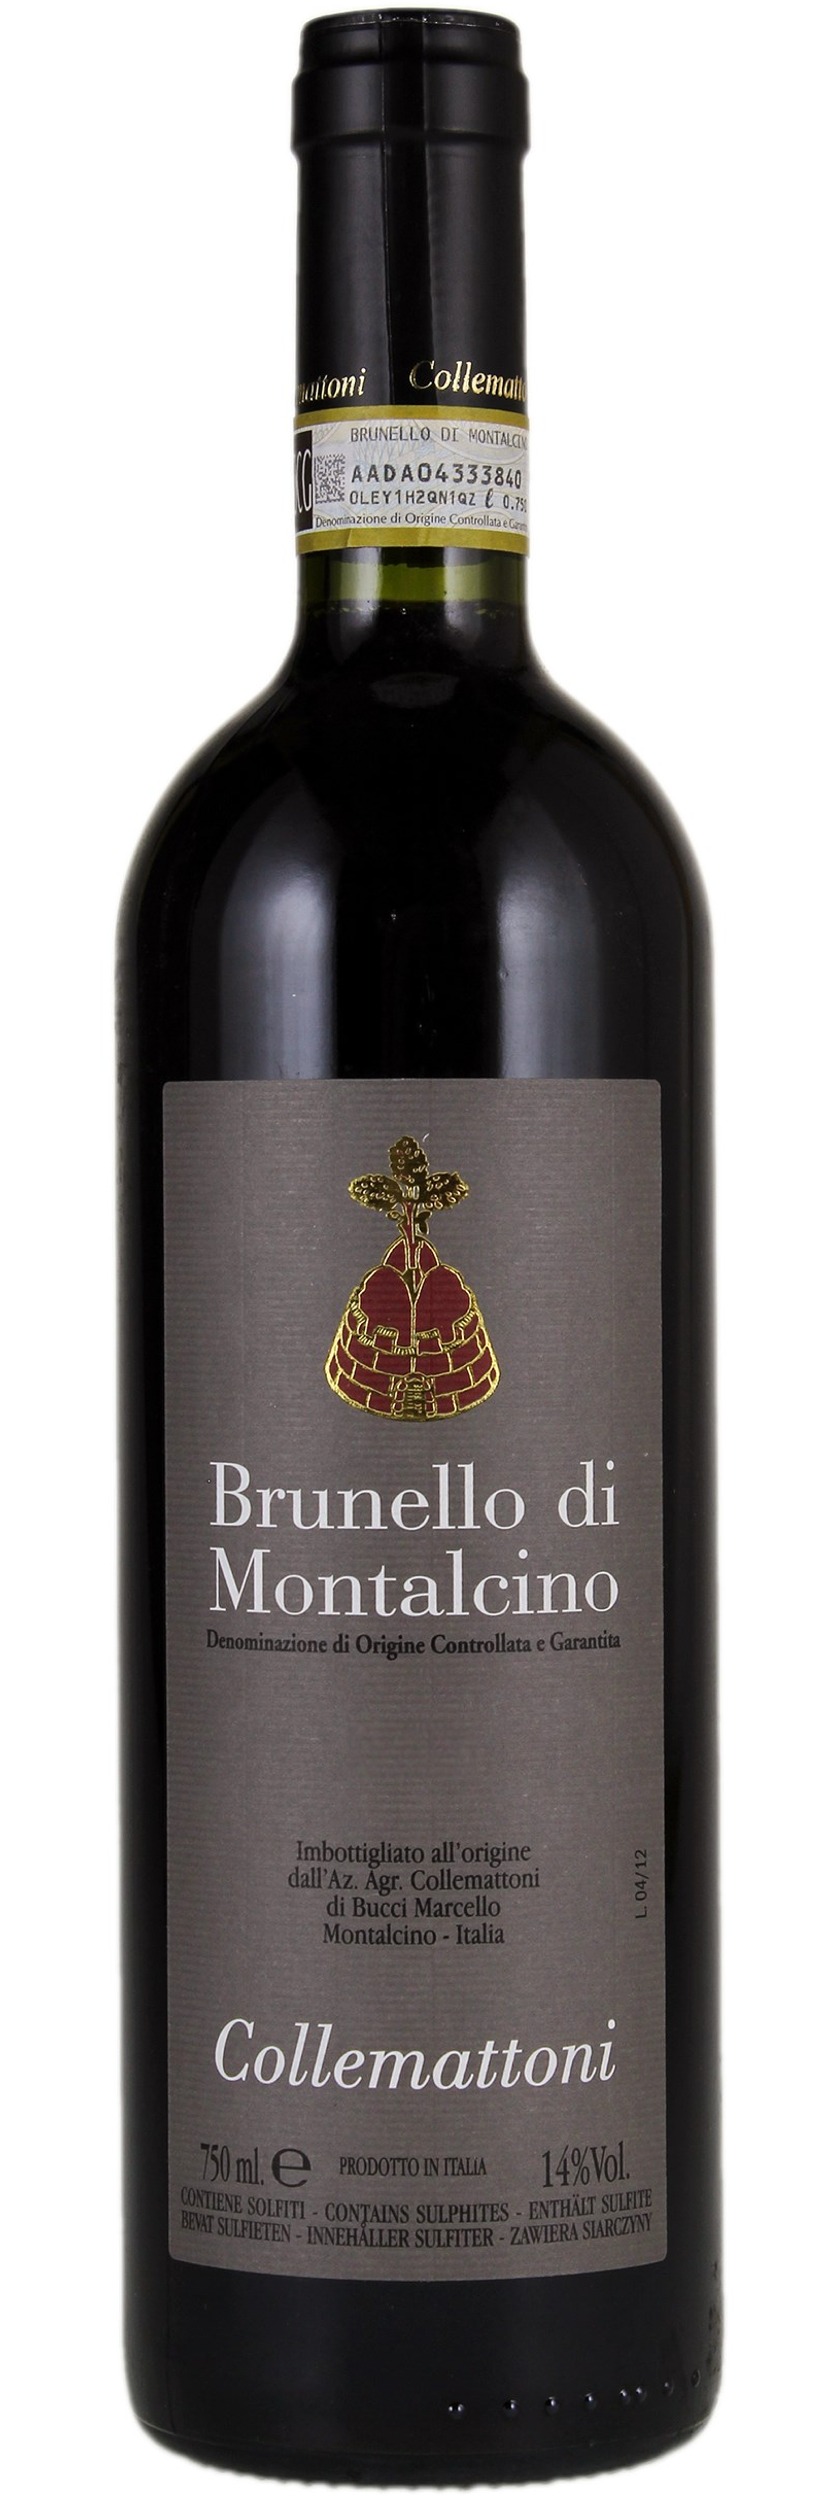 Collemattoni Brunello di Montalcino 2018  Timeless Wines - Order Wine  Online from the United States - California Wines - French Wines - Spanish  Wines - Chardonnay - Port - Cabernet Savignon